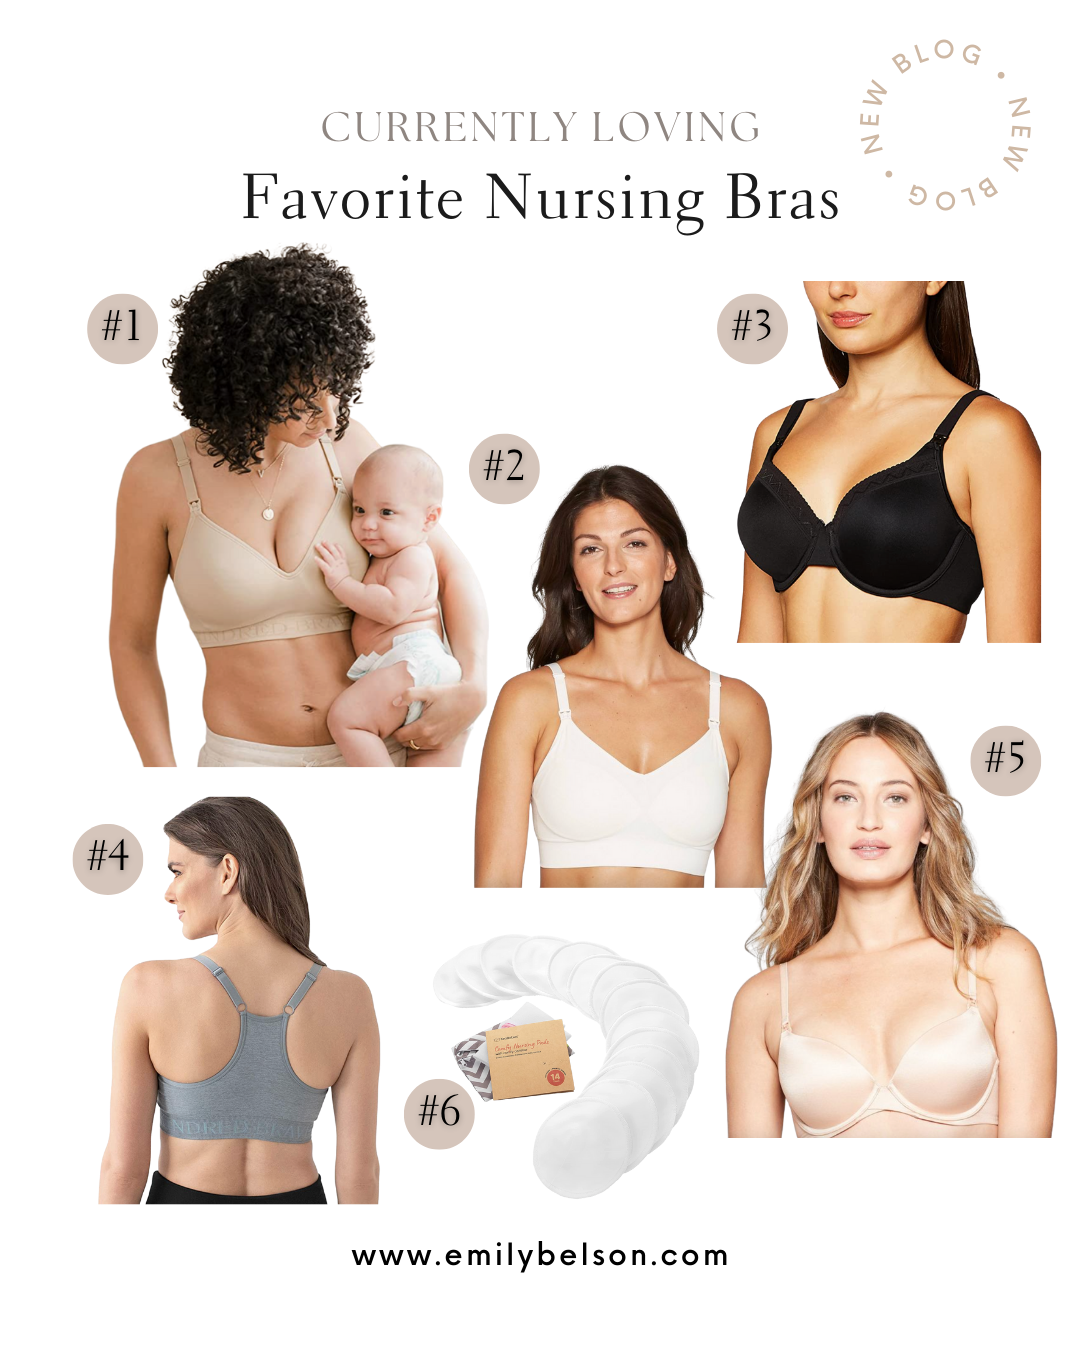 TYPES OF MATERNITY AND NURSING BRAS EVERYTHING YOU NEED TO KNOW by